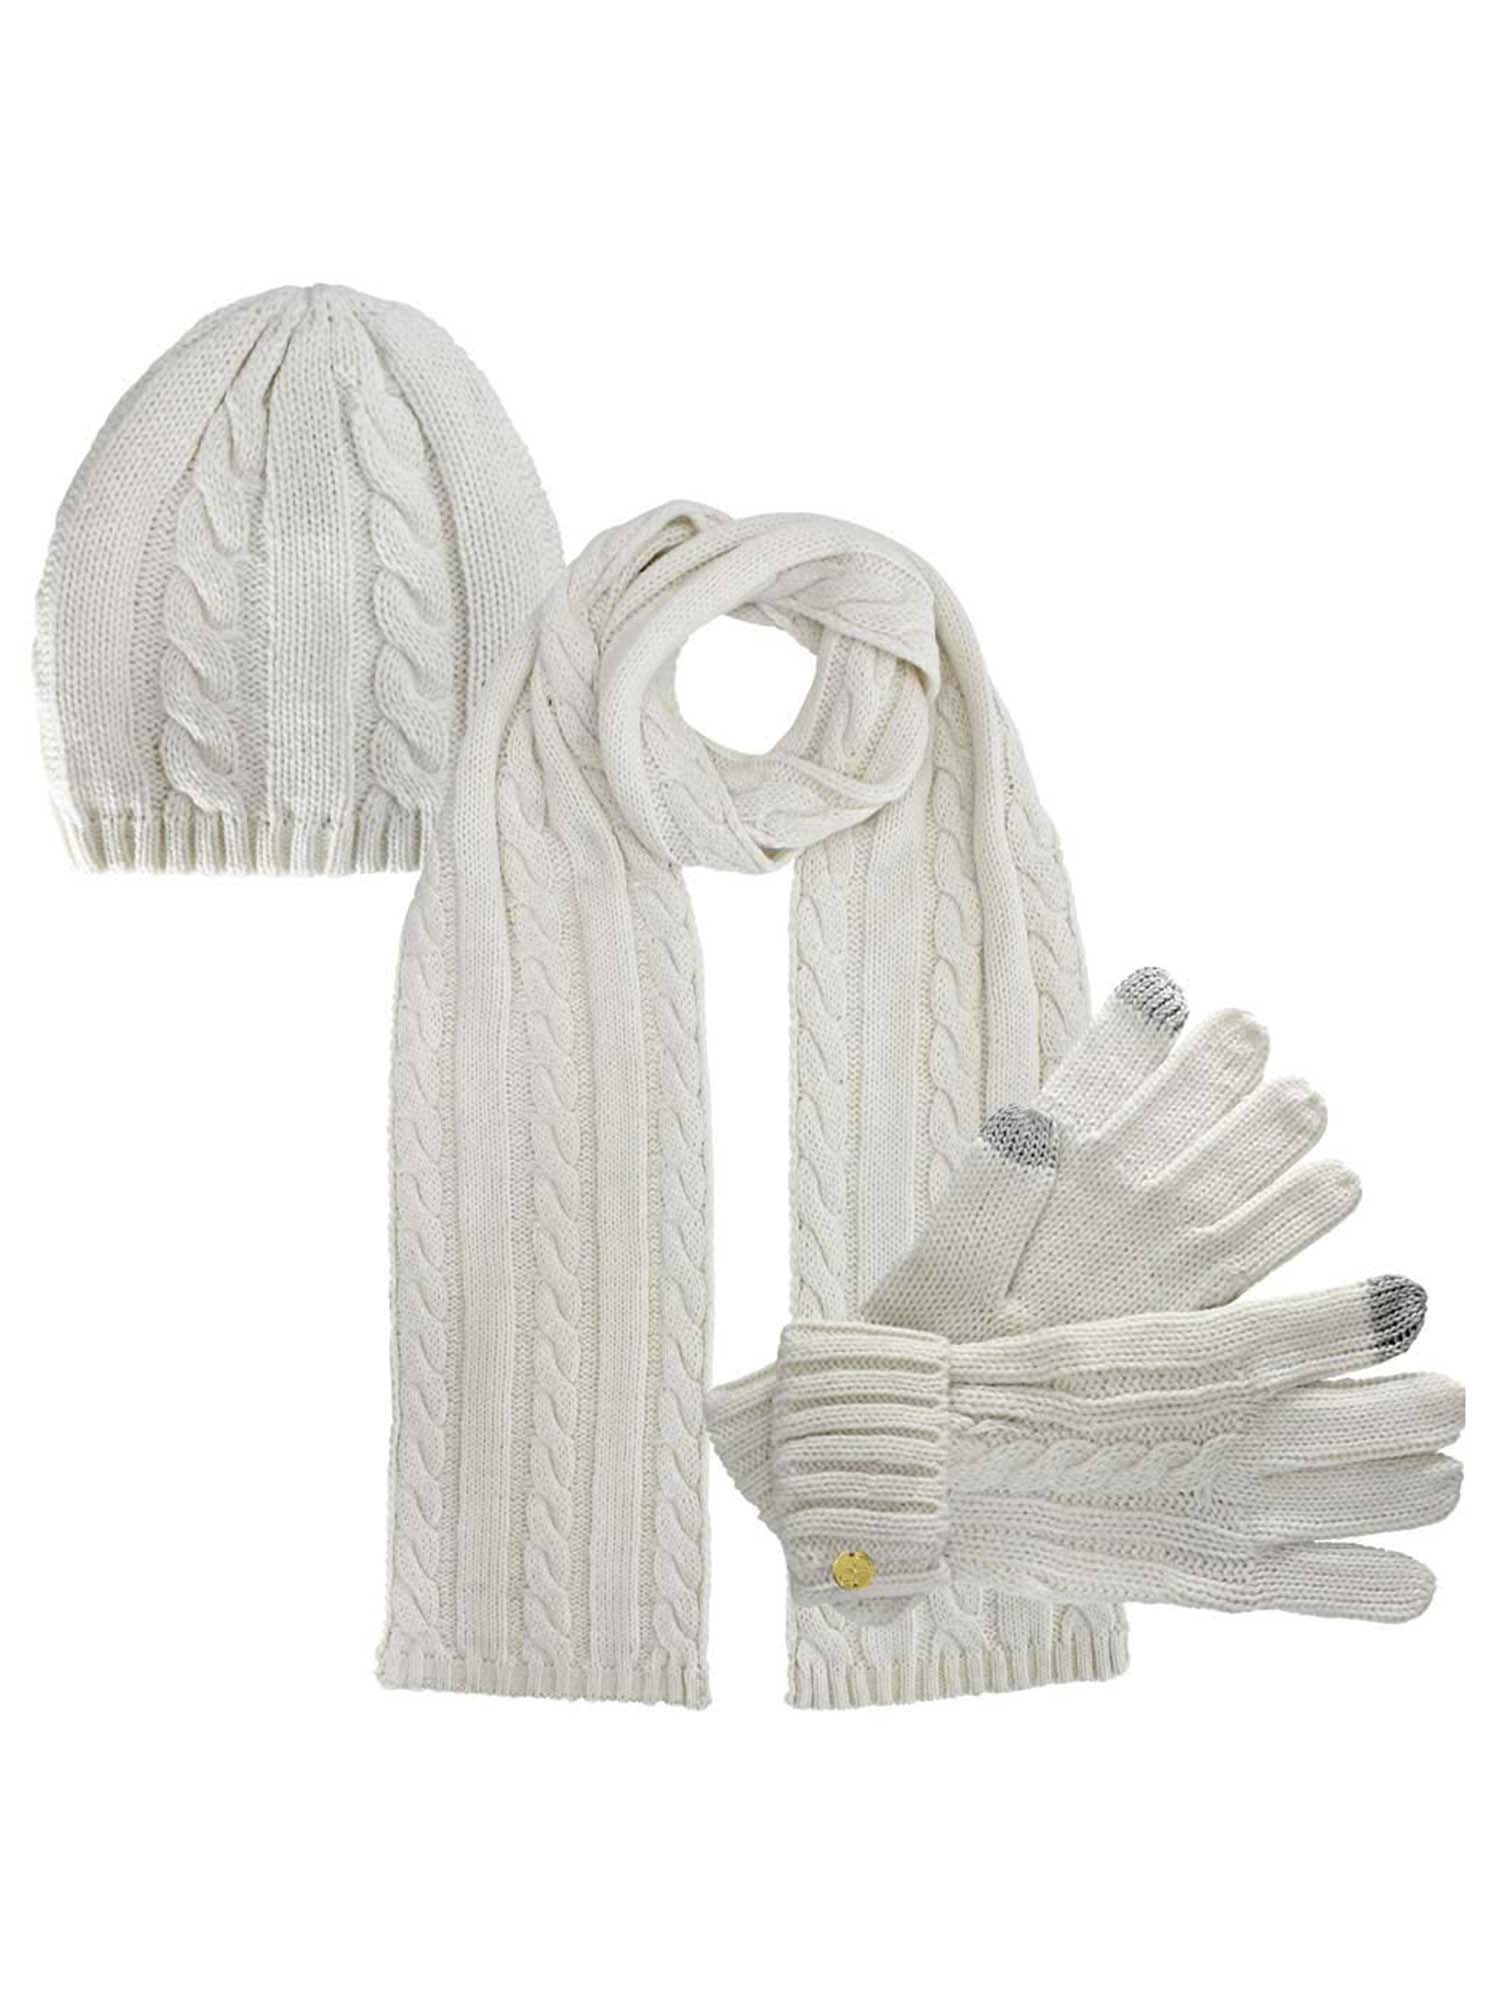 Luxury Divas - Cable Knit 3 Piece Beanie Hat Texting Gloves & Matching ...